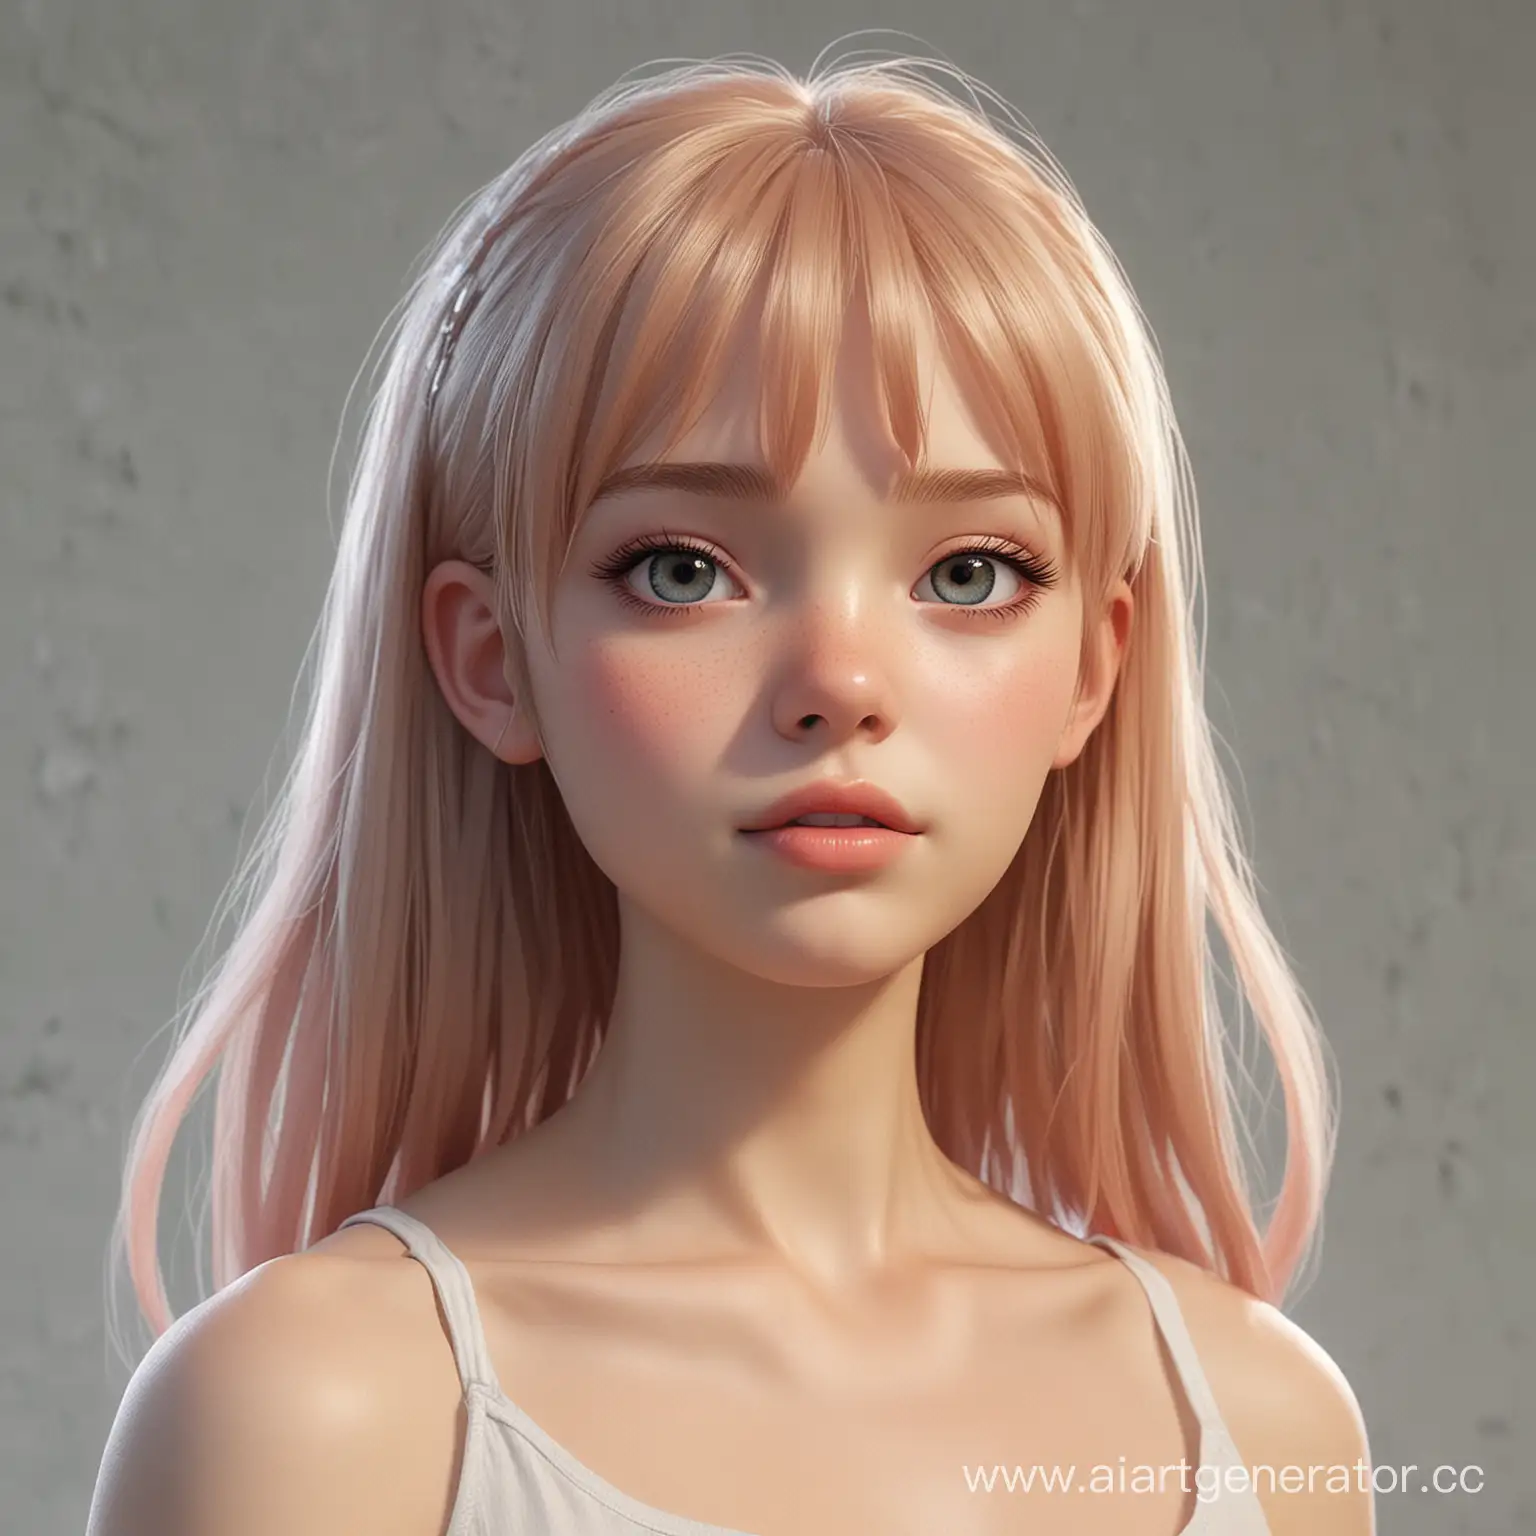 Portrait-of-a-Human-Girl-with-Innocent-Expression